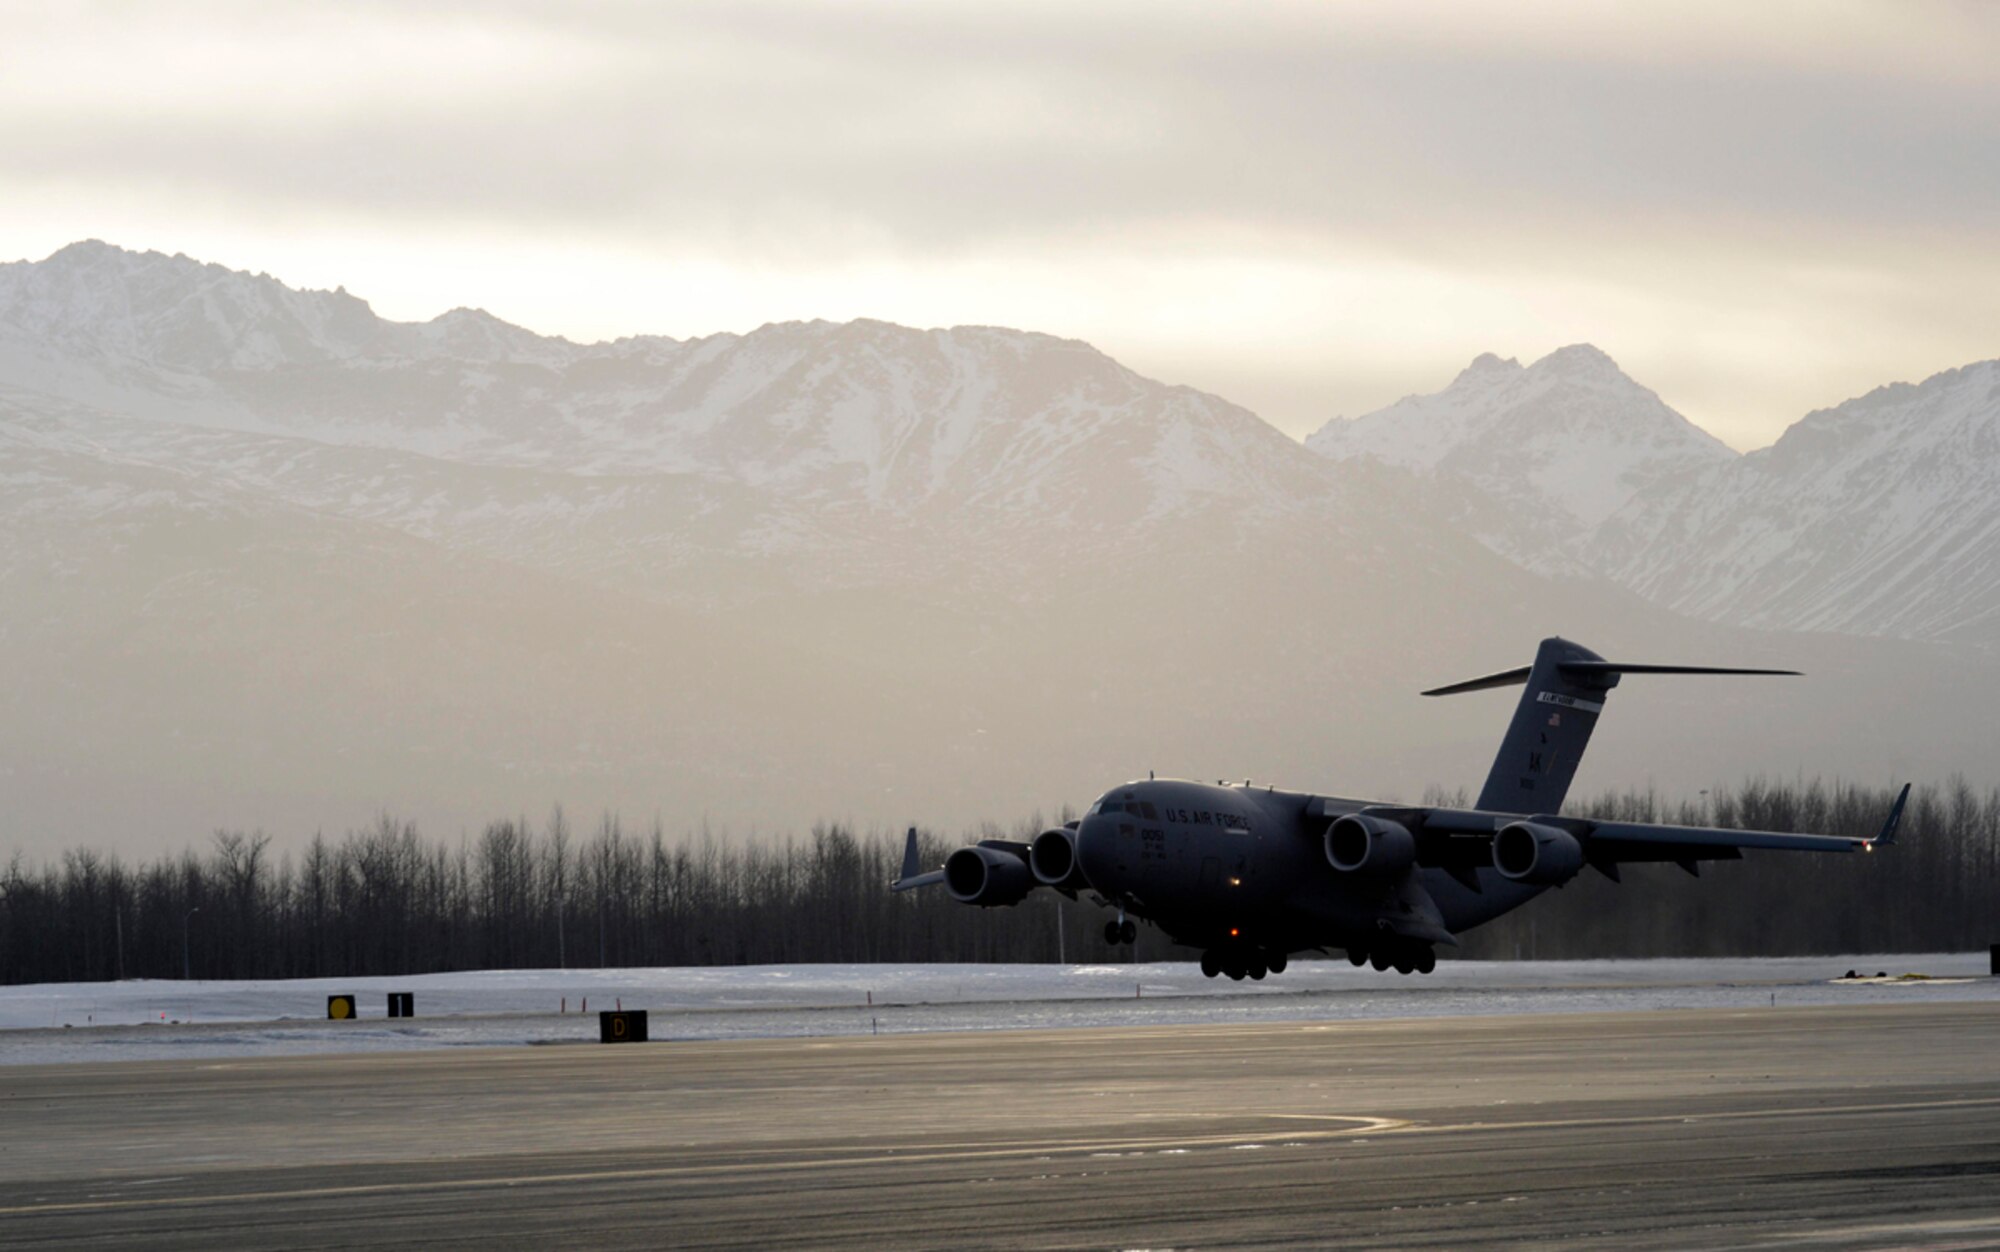 A C-17 Globemaster III assigned to the 517th Airlift Squadron lands during exercise Polar Force 14-2 on Joint Base Elmendorf-Richardson, Alaska, Feb. 10, 2014. The 517th AS provides tactical airlift operations to support worldwide airlift, airdrop, and airland requirements while providing airlift for theater deployed forces and resupply of remote Alaskan long-range radar sites. (U.S. Air Force photo/Staff Sgt. Sheila deVera)